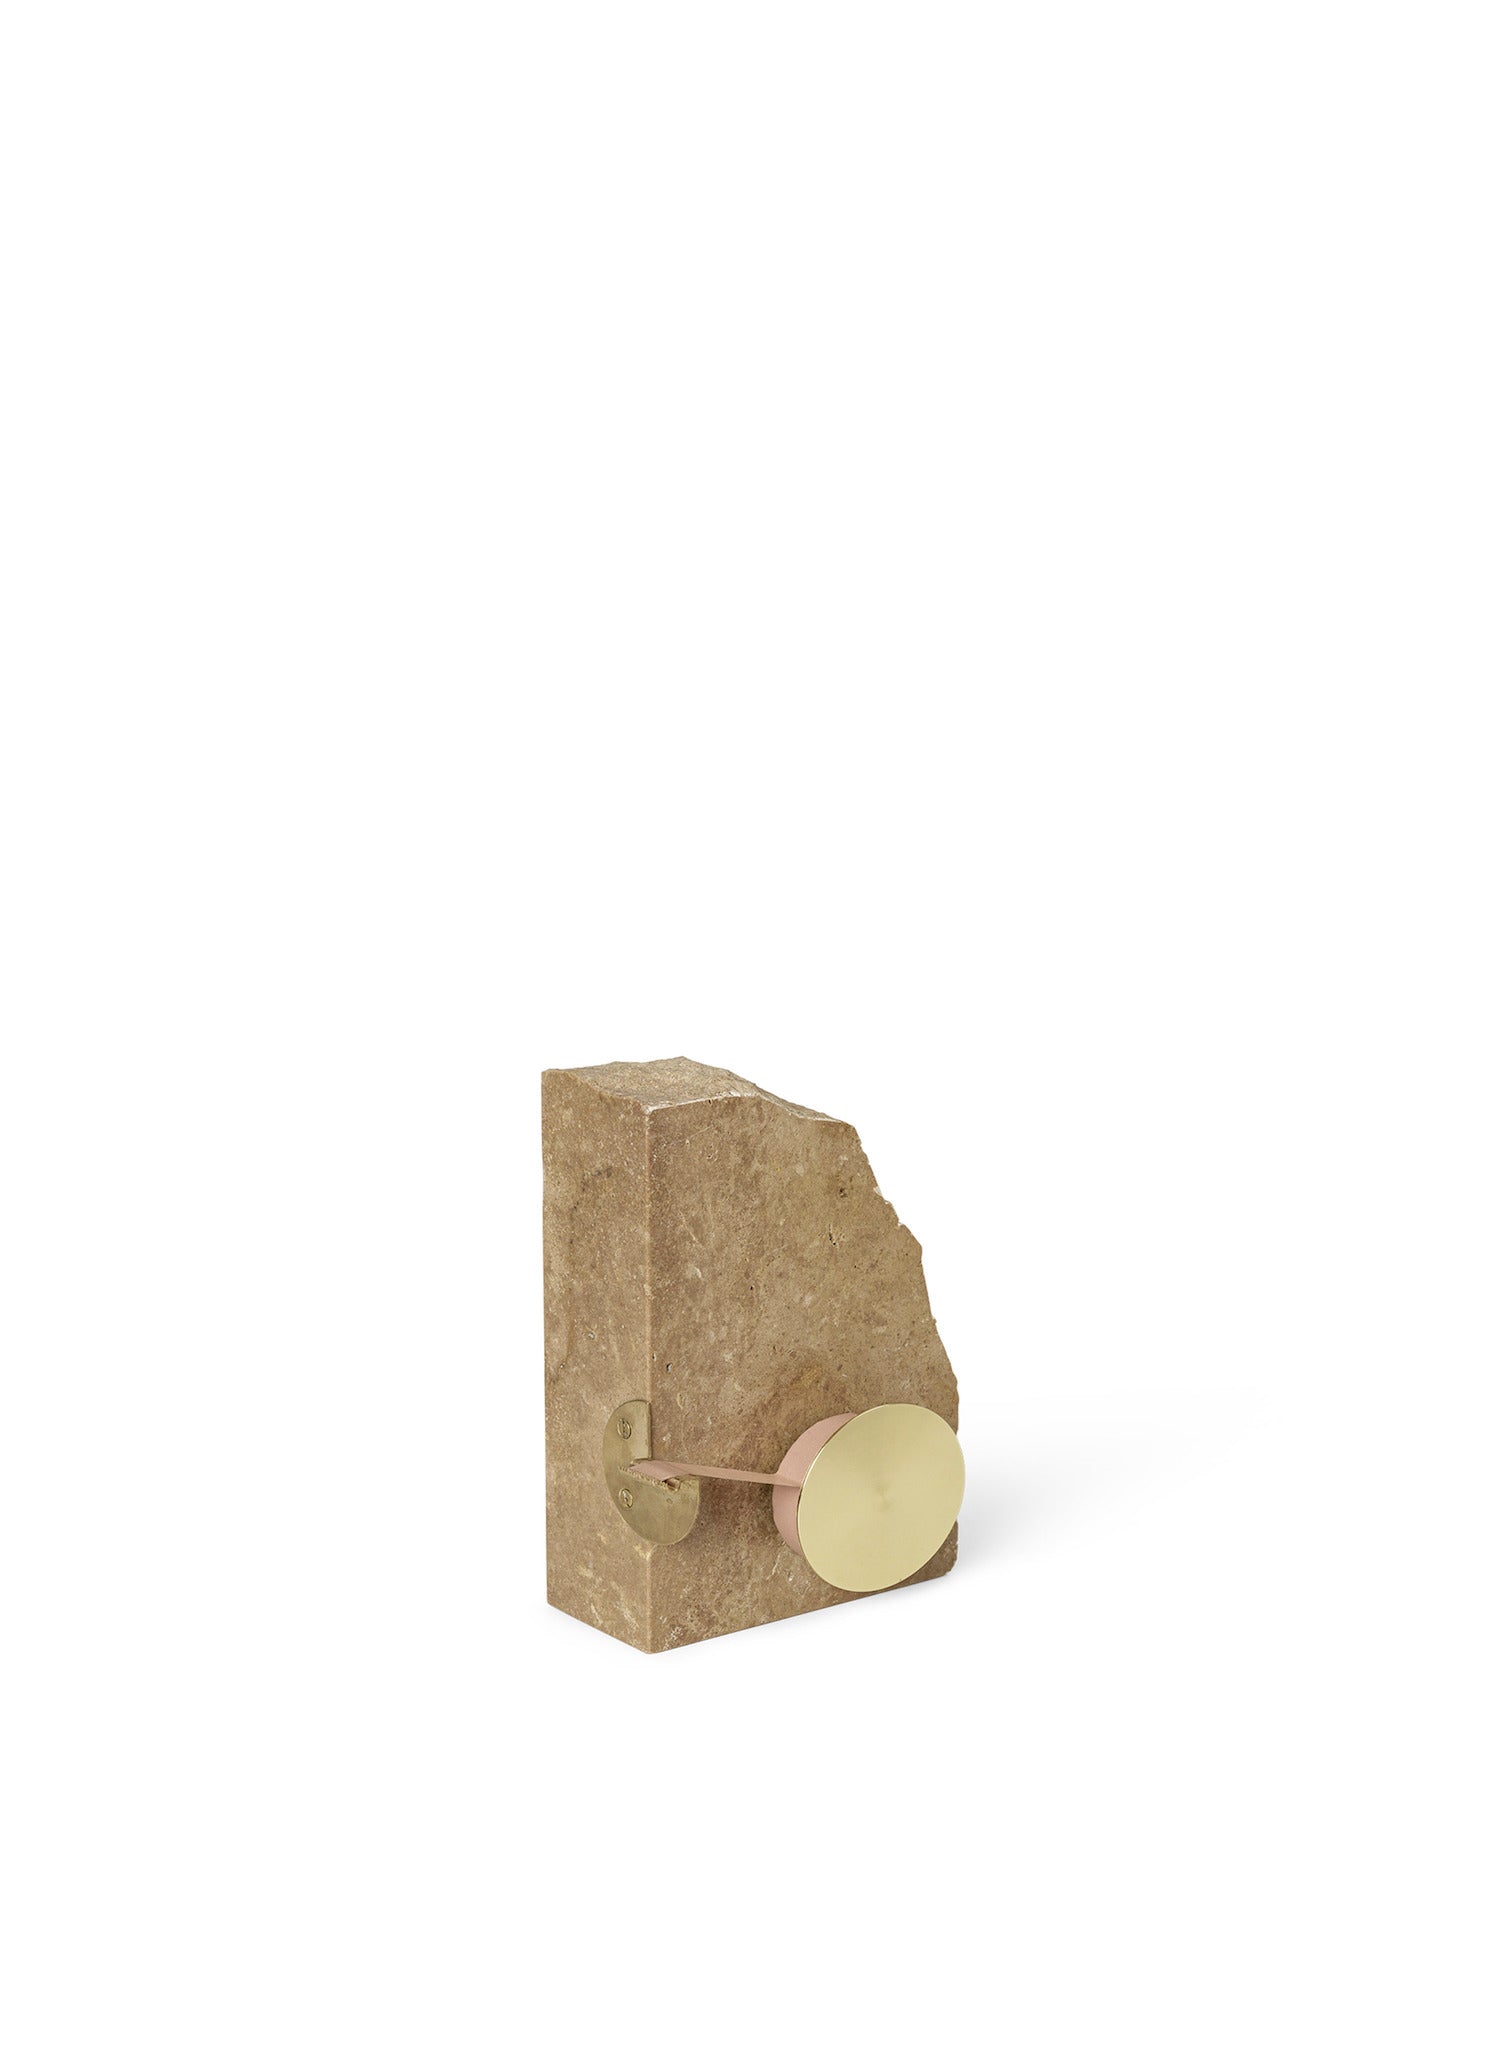 Klint Tape Dispenser. An elevated office accessory with a base made from travertine stone and functional tape dispenser features made of brushed brass. 